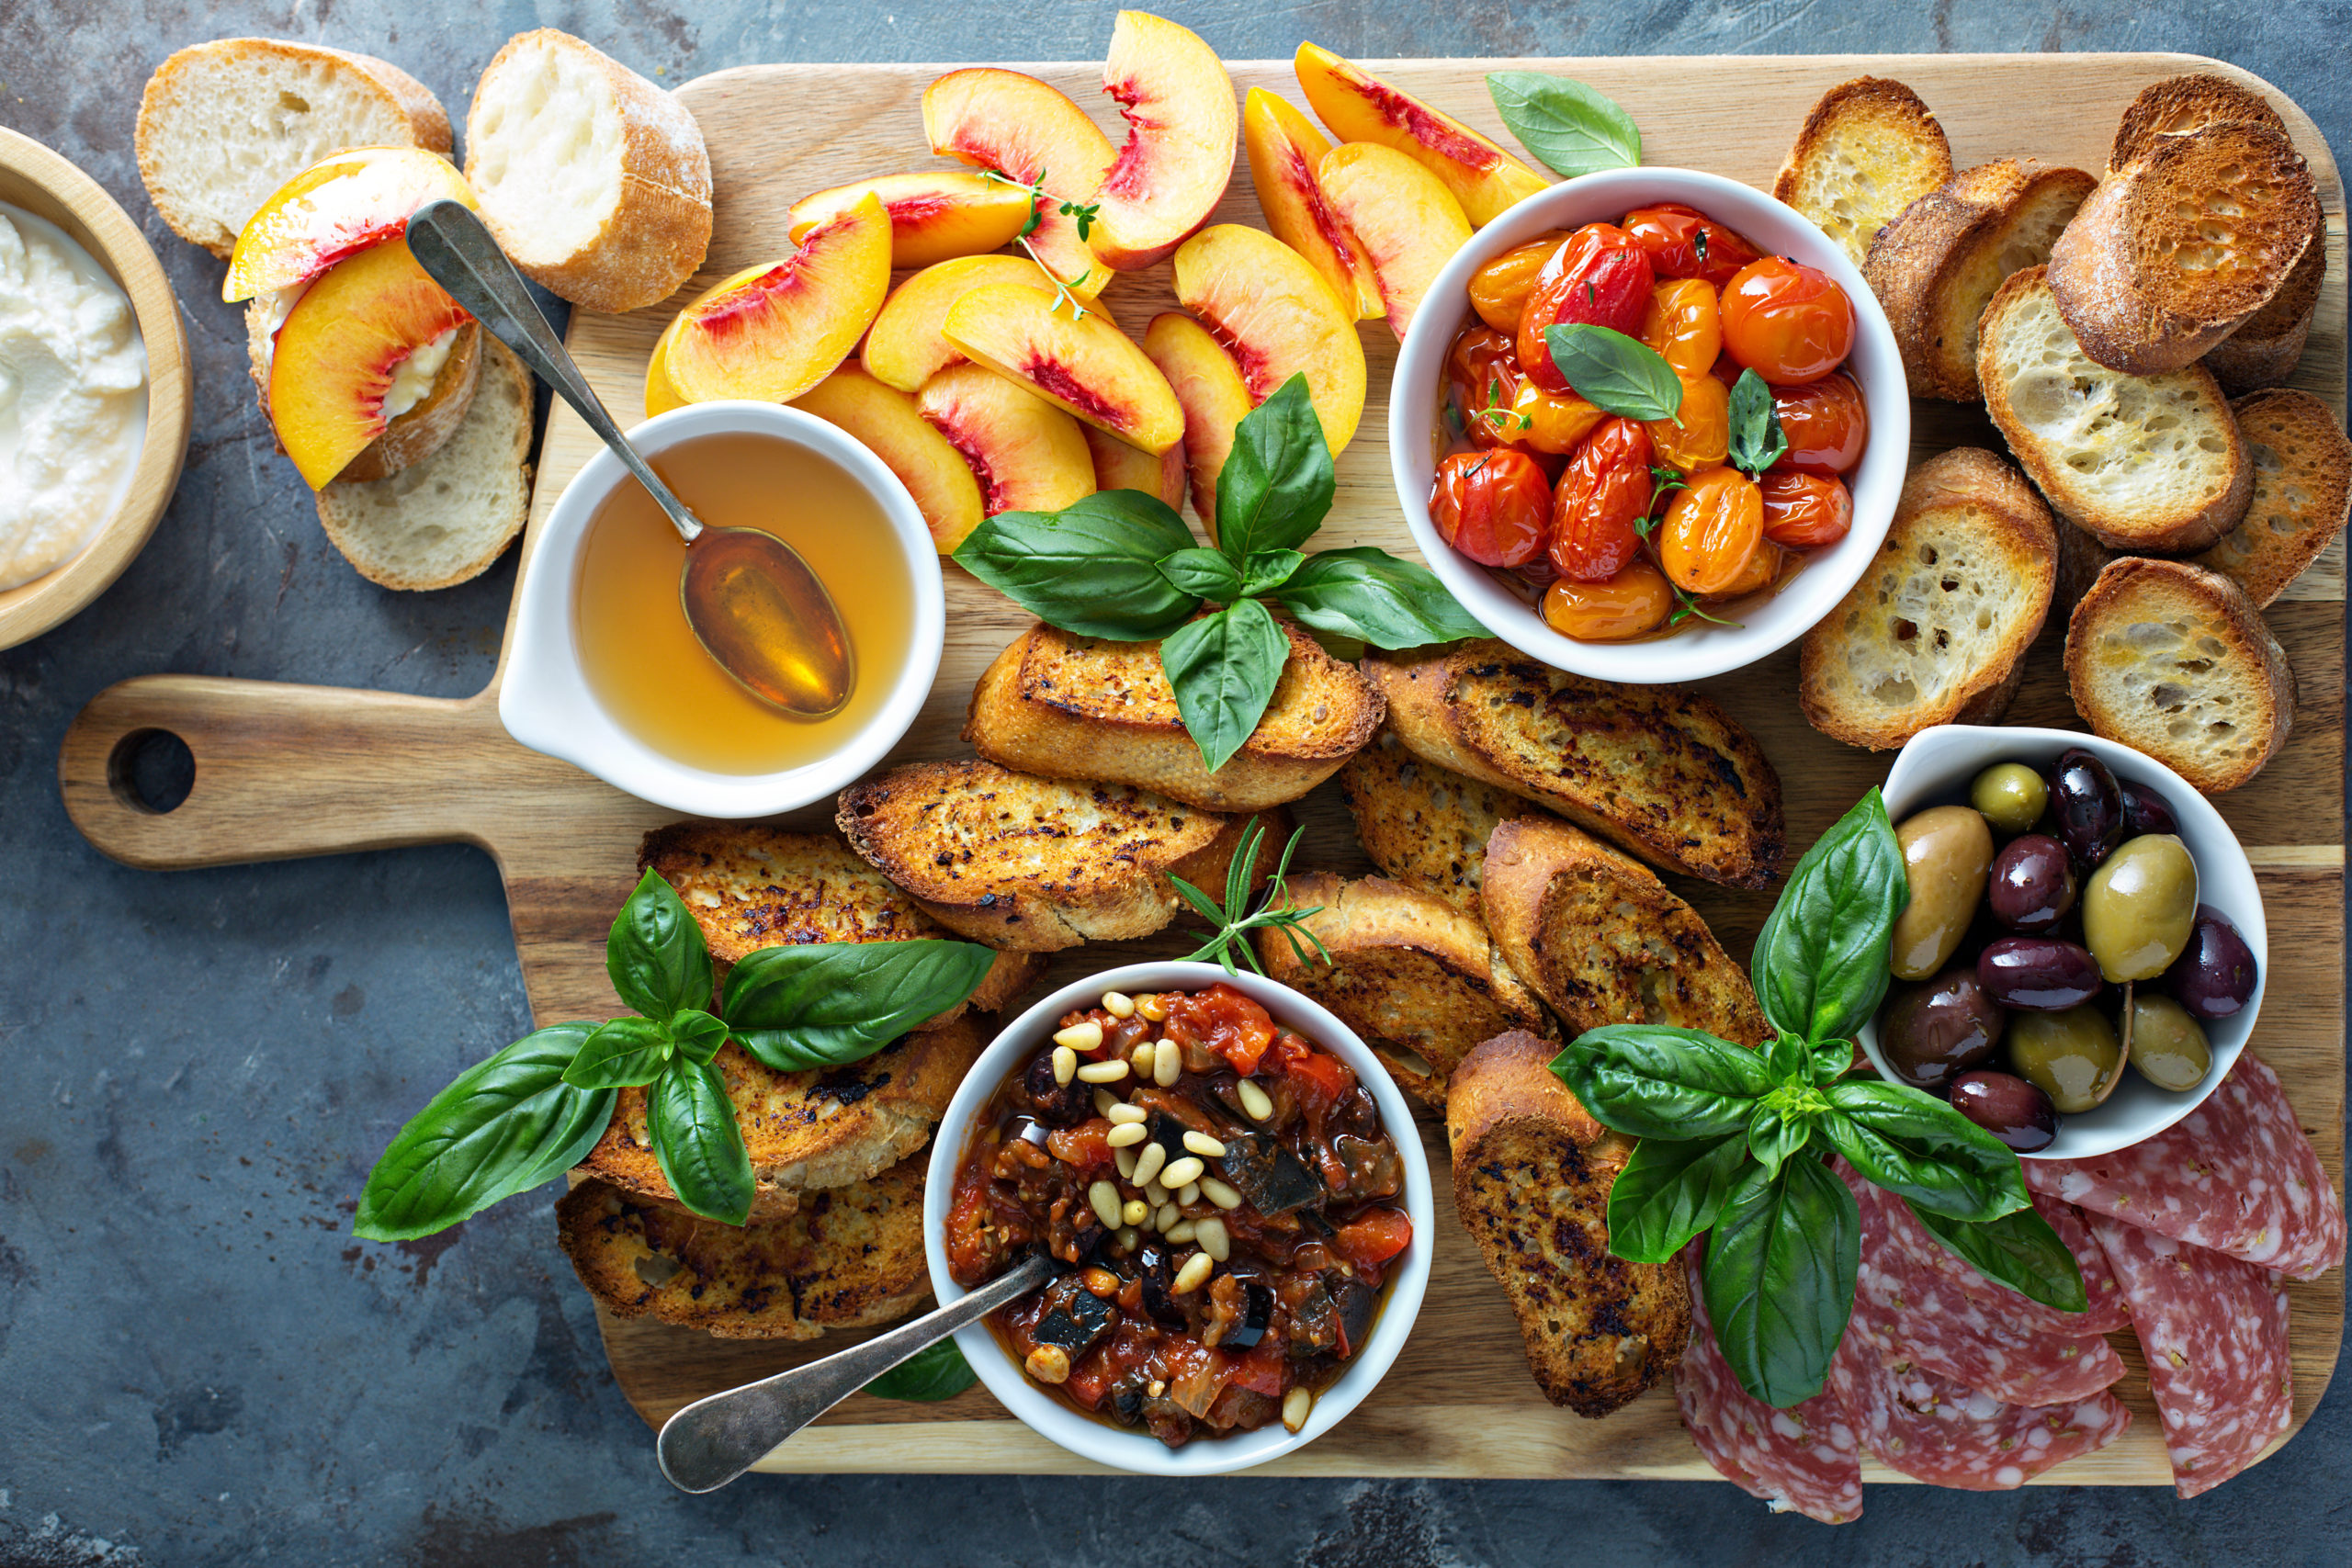 Crostini board with tomatoes, peaches and dip